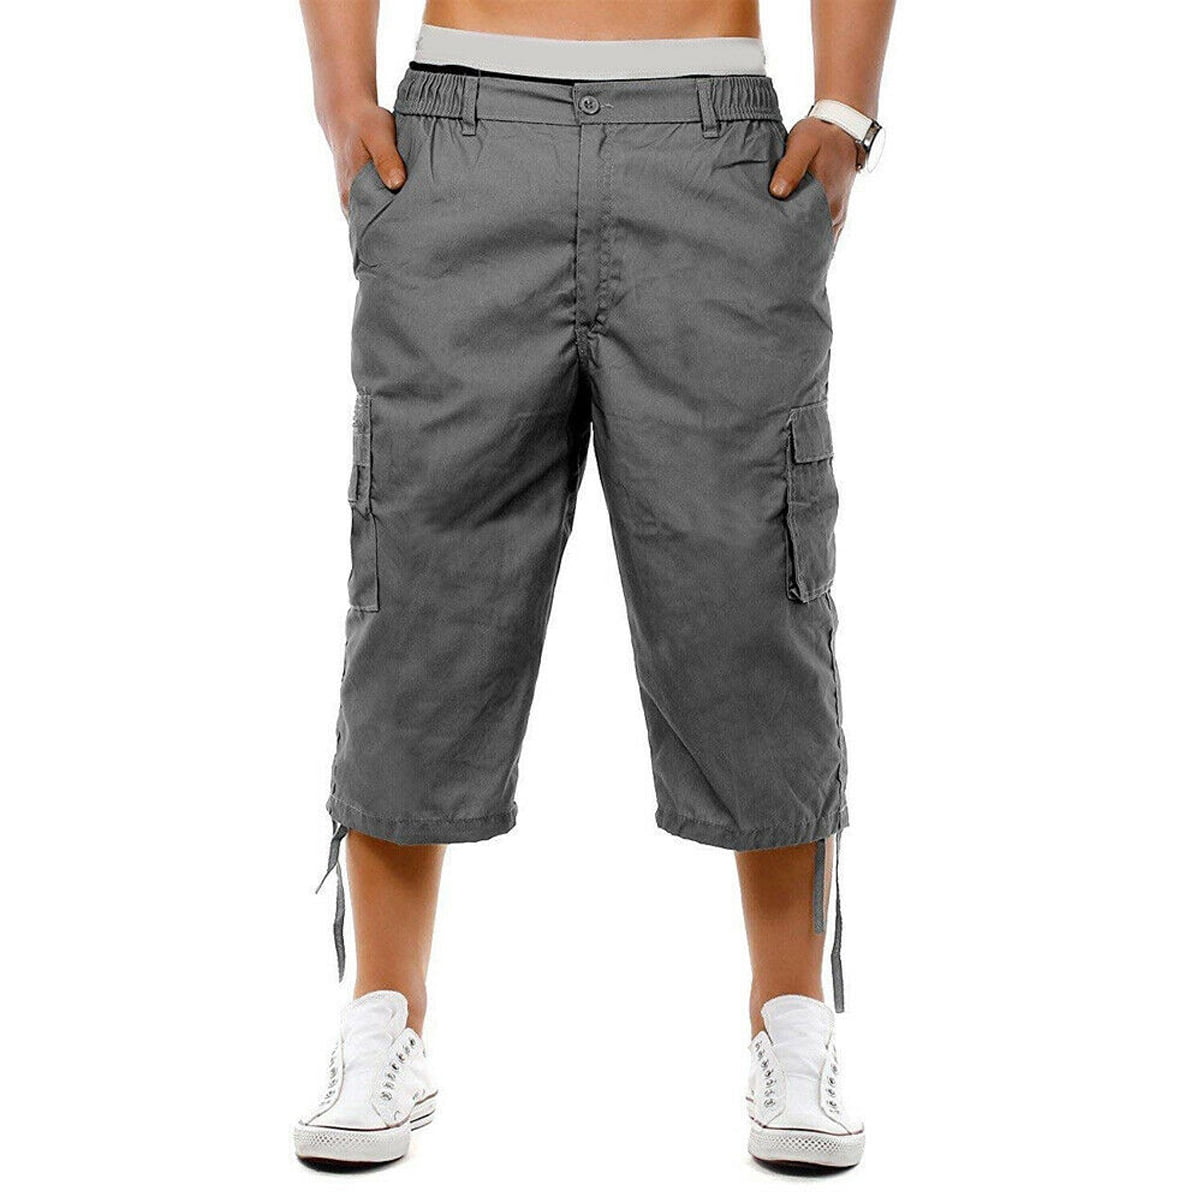 Where To Get Cargo Shorts